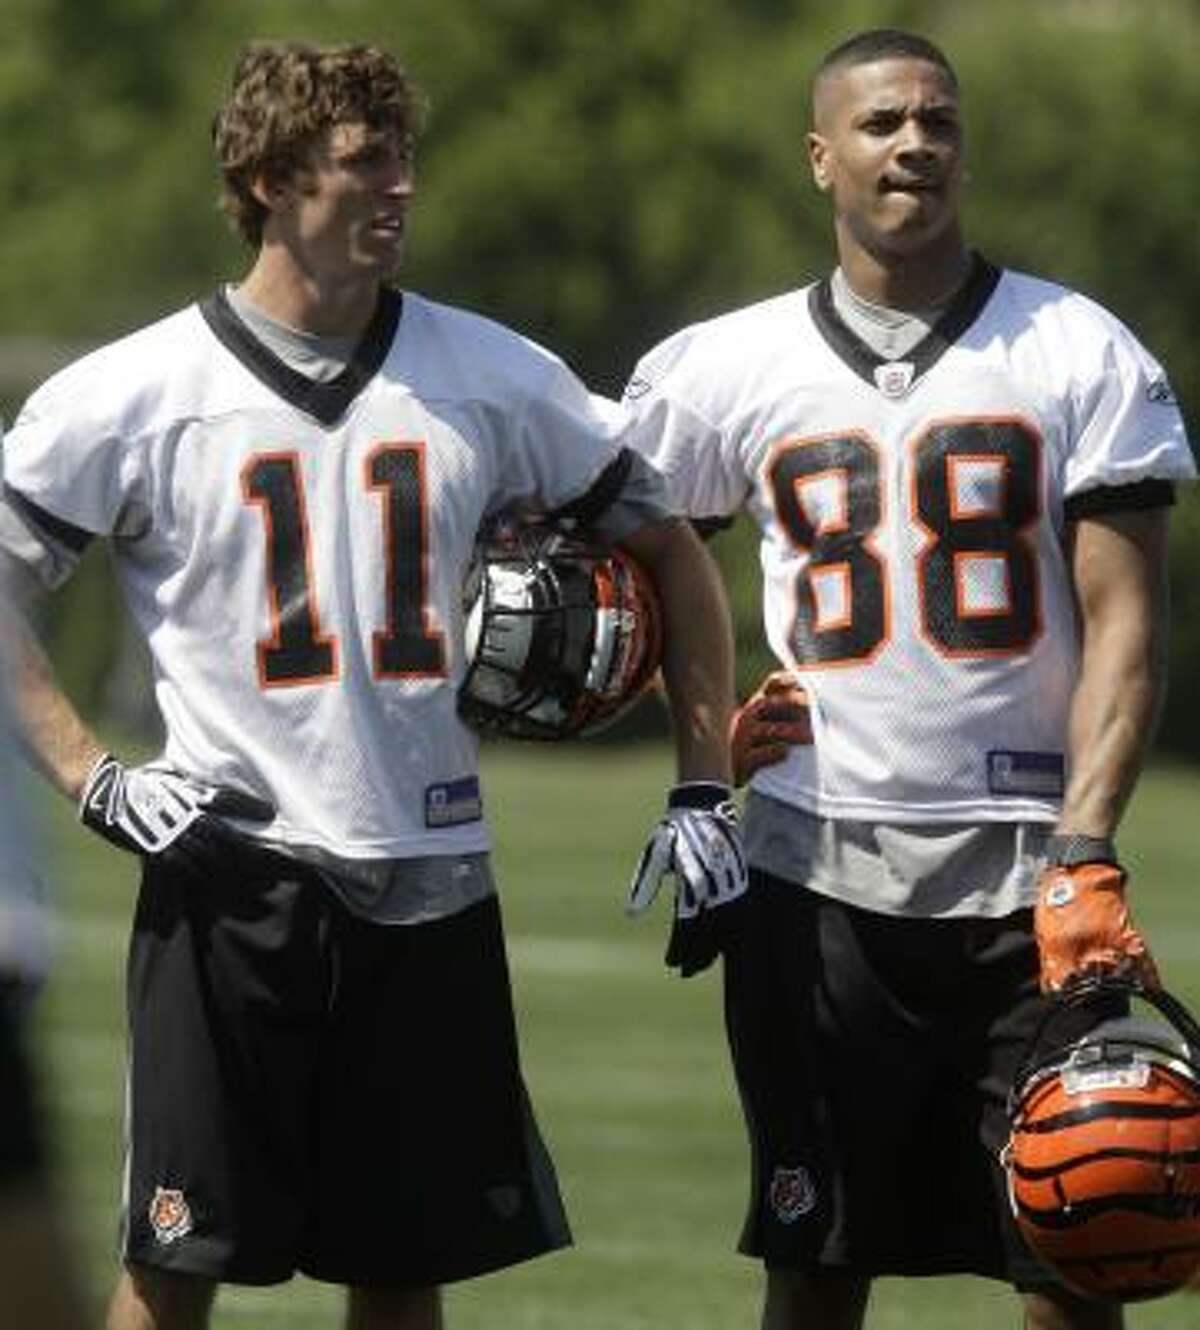 Cincinnati Bengals receivers Jordan Shipley (11) and Dezmon Briscoe take in Friday's minicamp. Shipley, who played for Texas, was drafted in the third round.